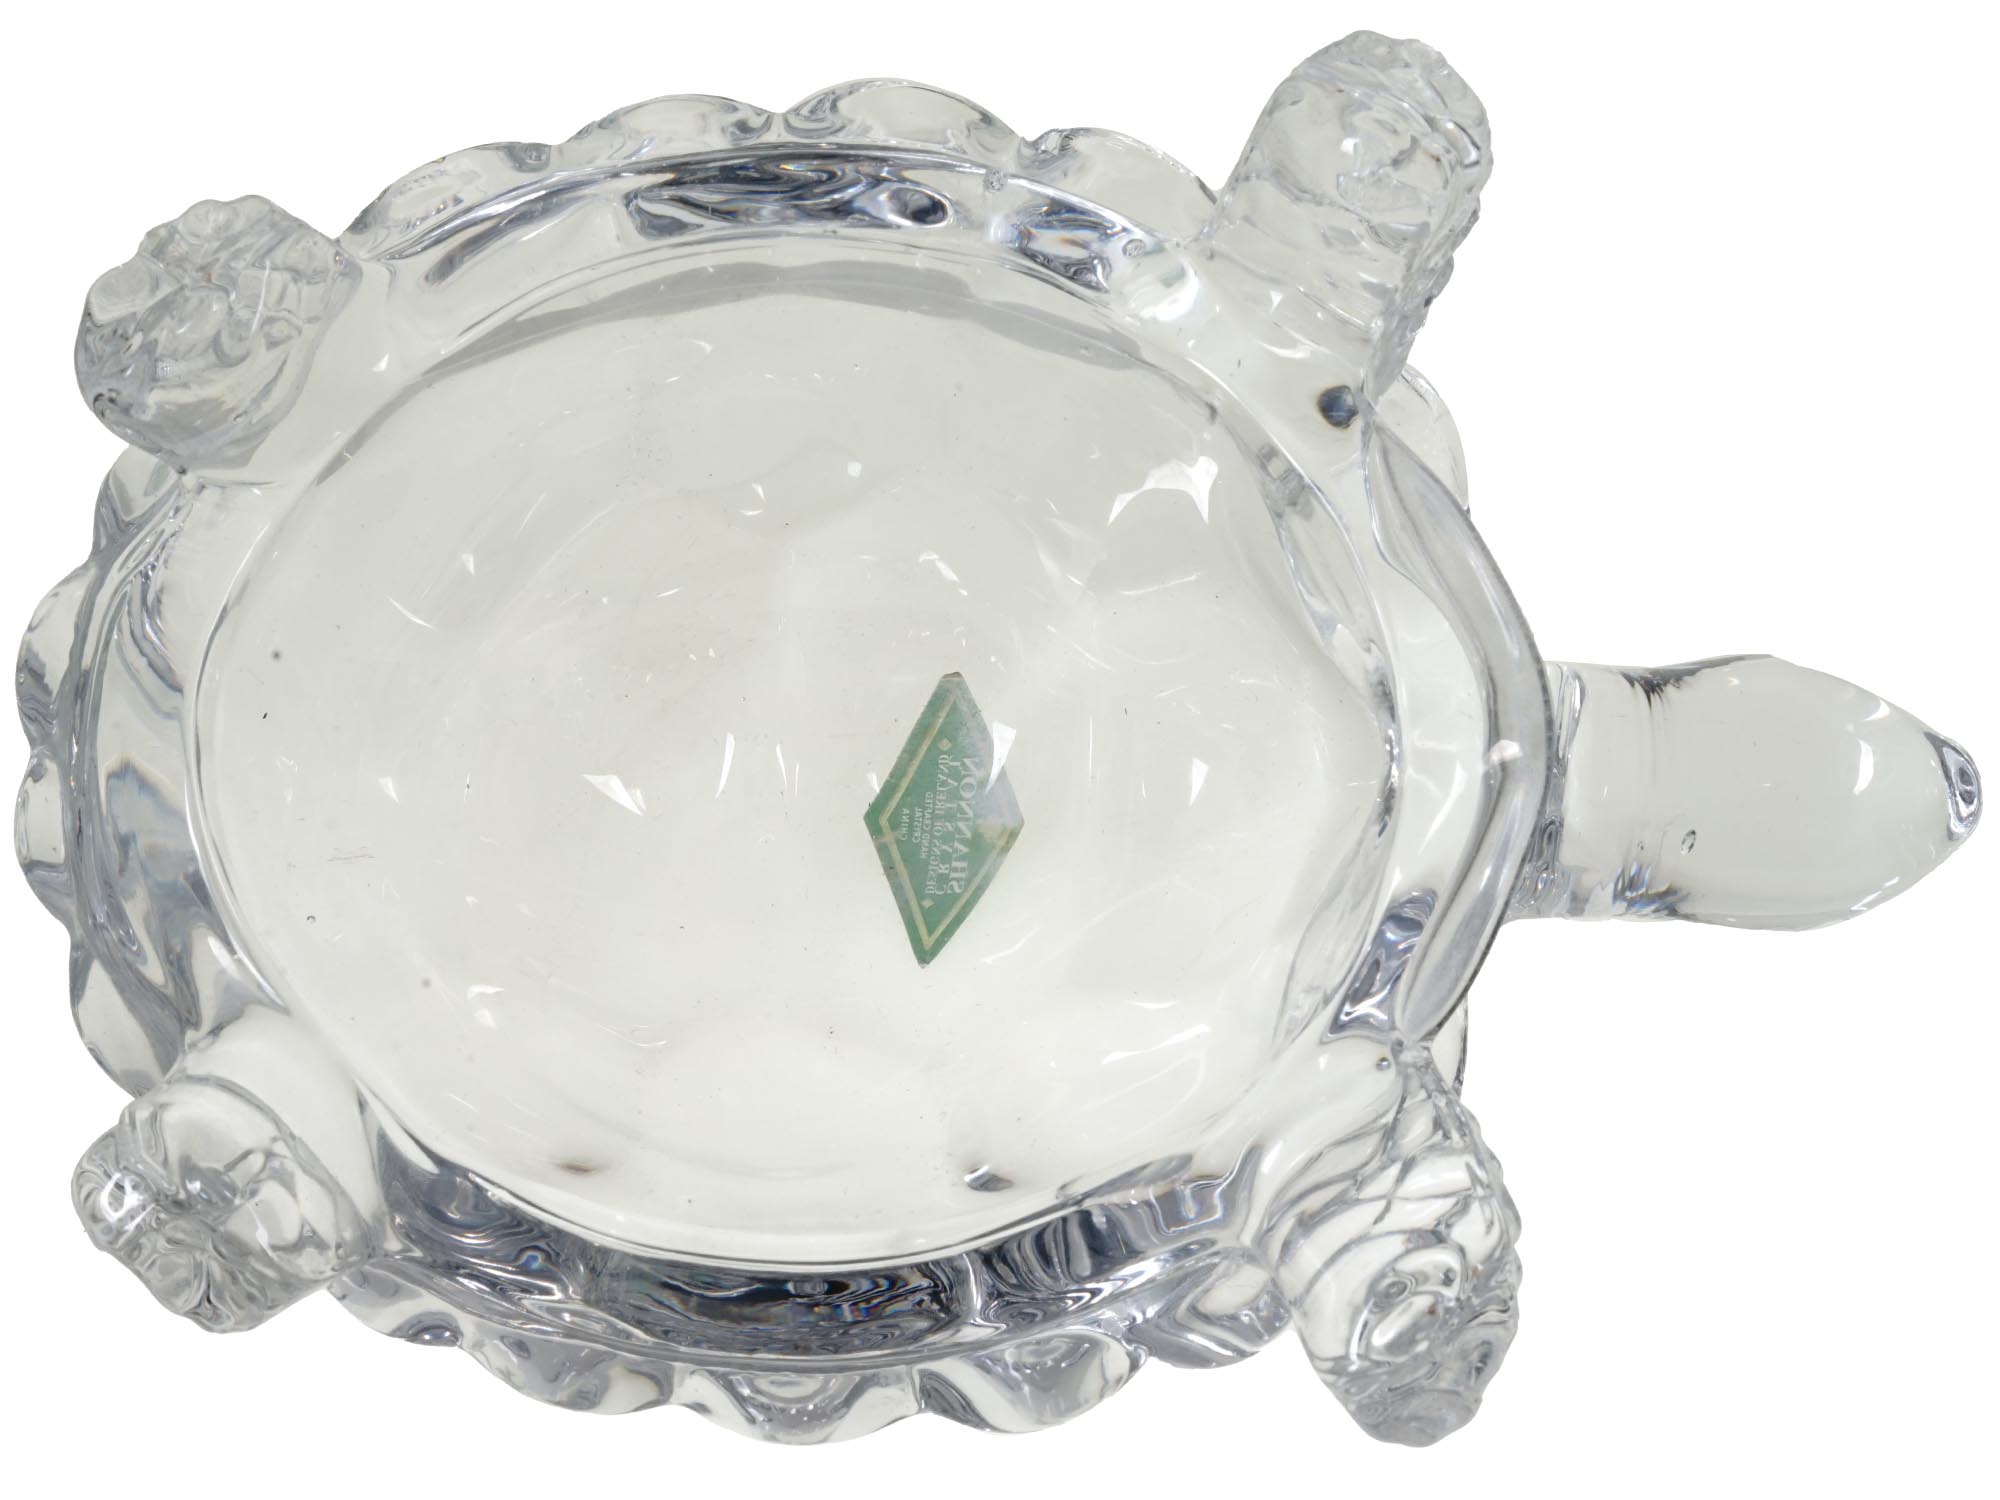 CHINESE SHANNON CRYSTAL GLASS FIGURINE OF TURTLE PIC-4